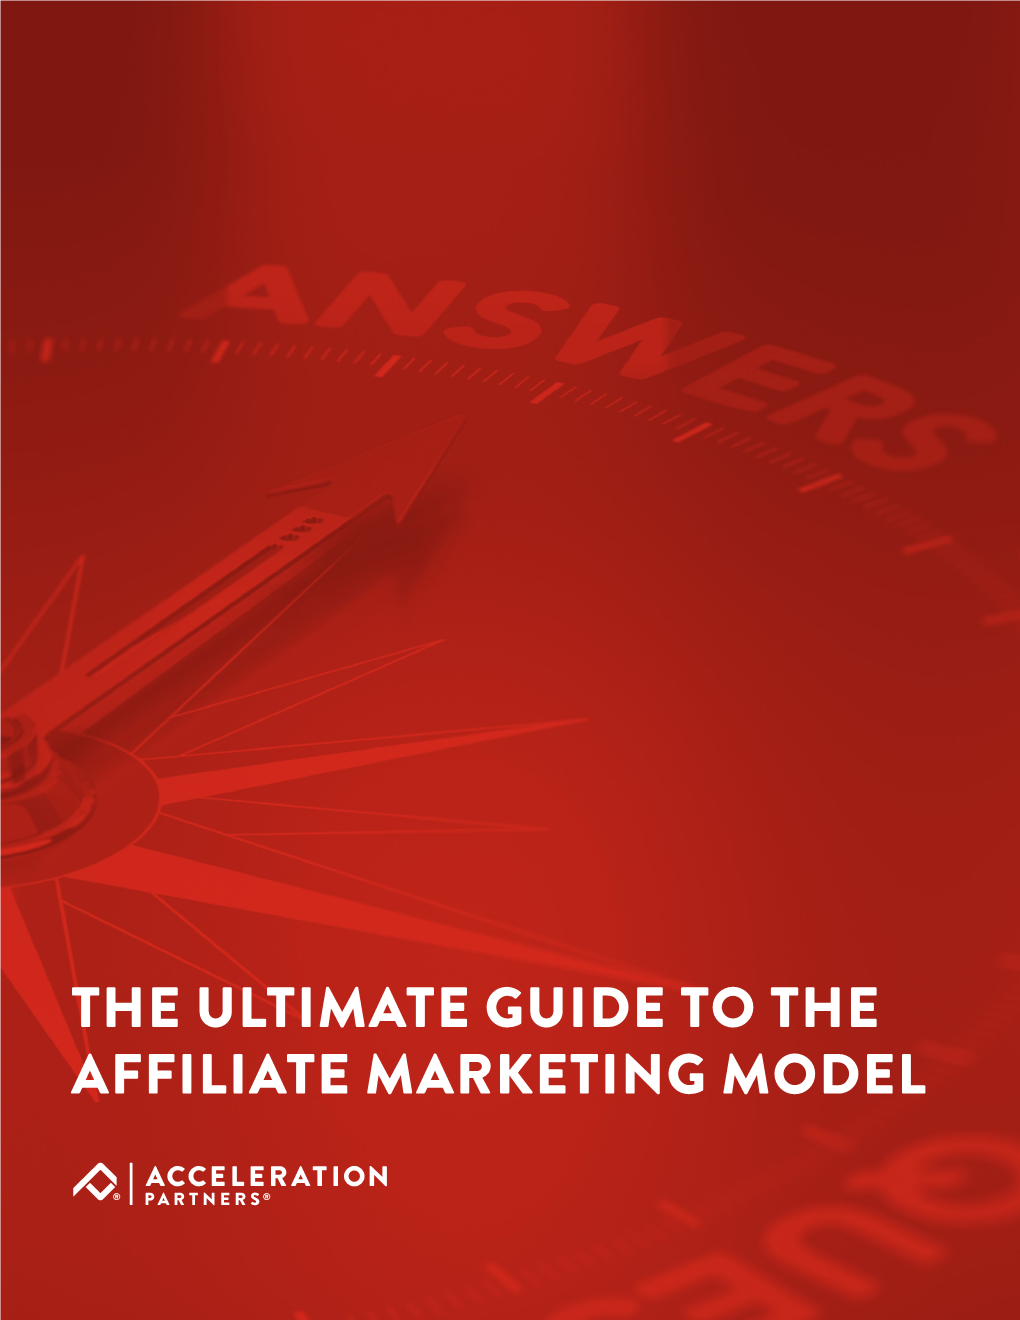 The Ultimate Guide to the Affiliate Marketing Model